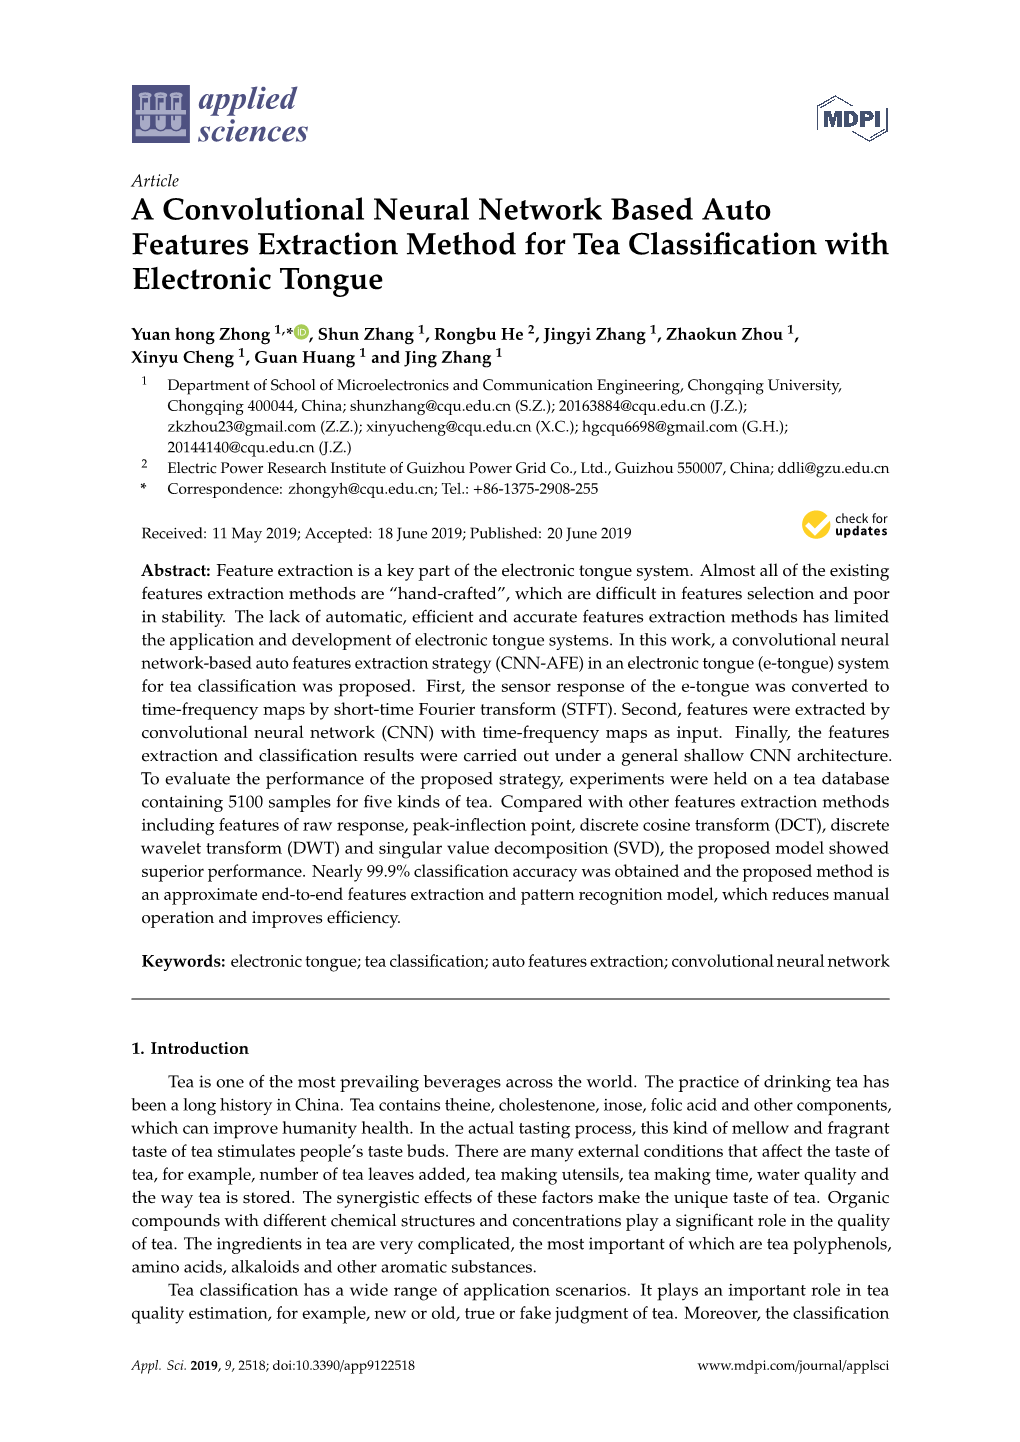 A Convolutional Neural Network Based Auto Features Extraction Method for Tea Classification with Electronic Tongue